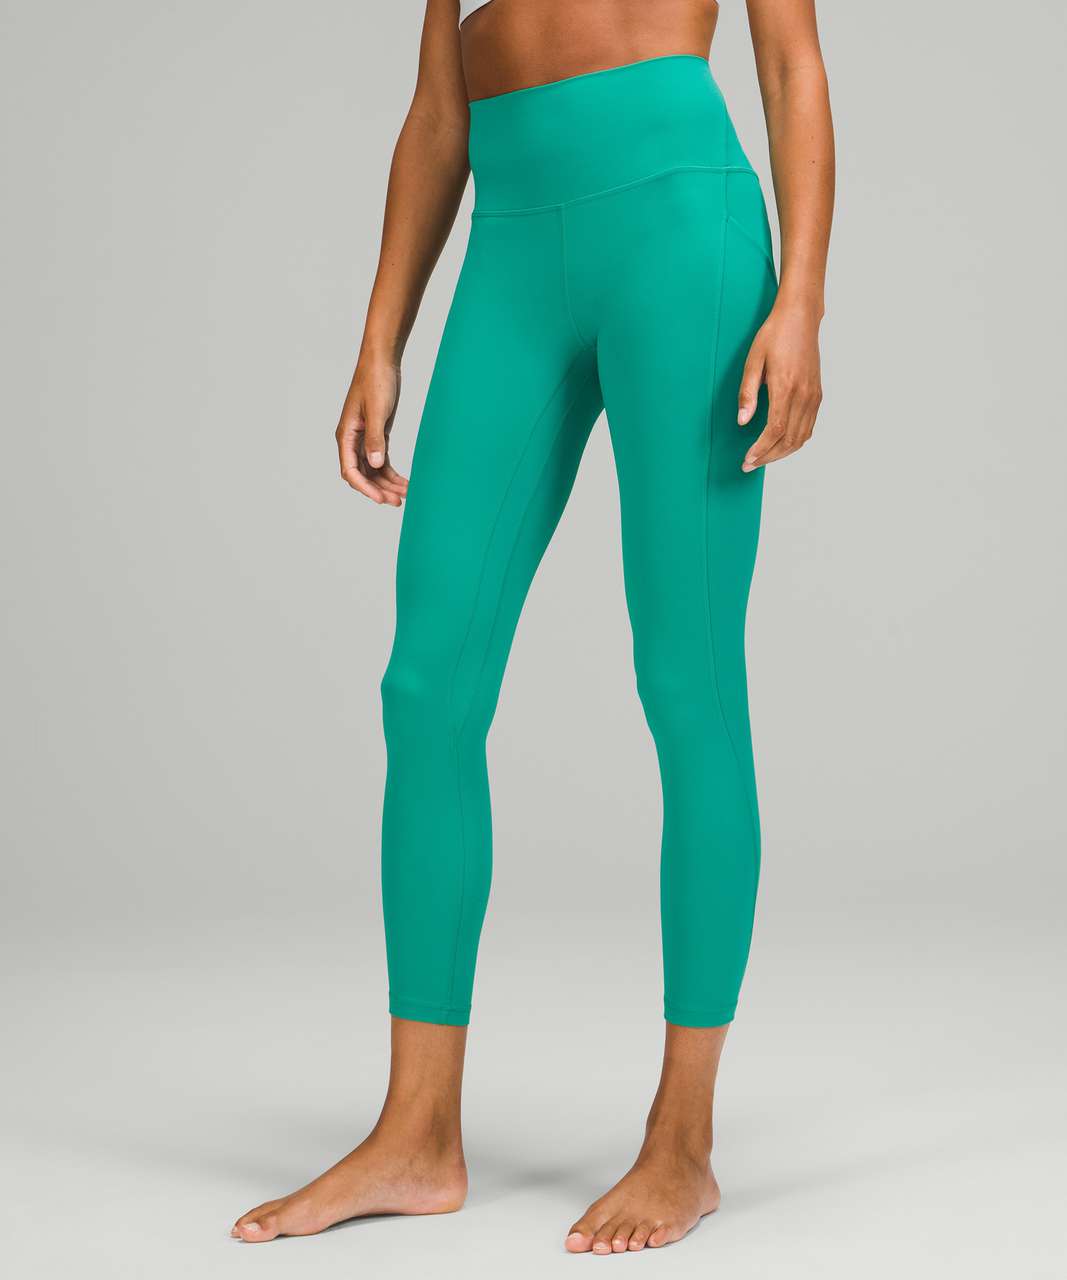 Lululemon Align High-Rise Pant with Pockets 25" - Maldives Green